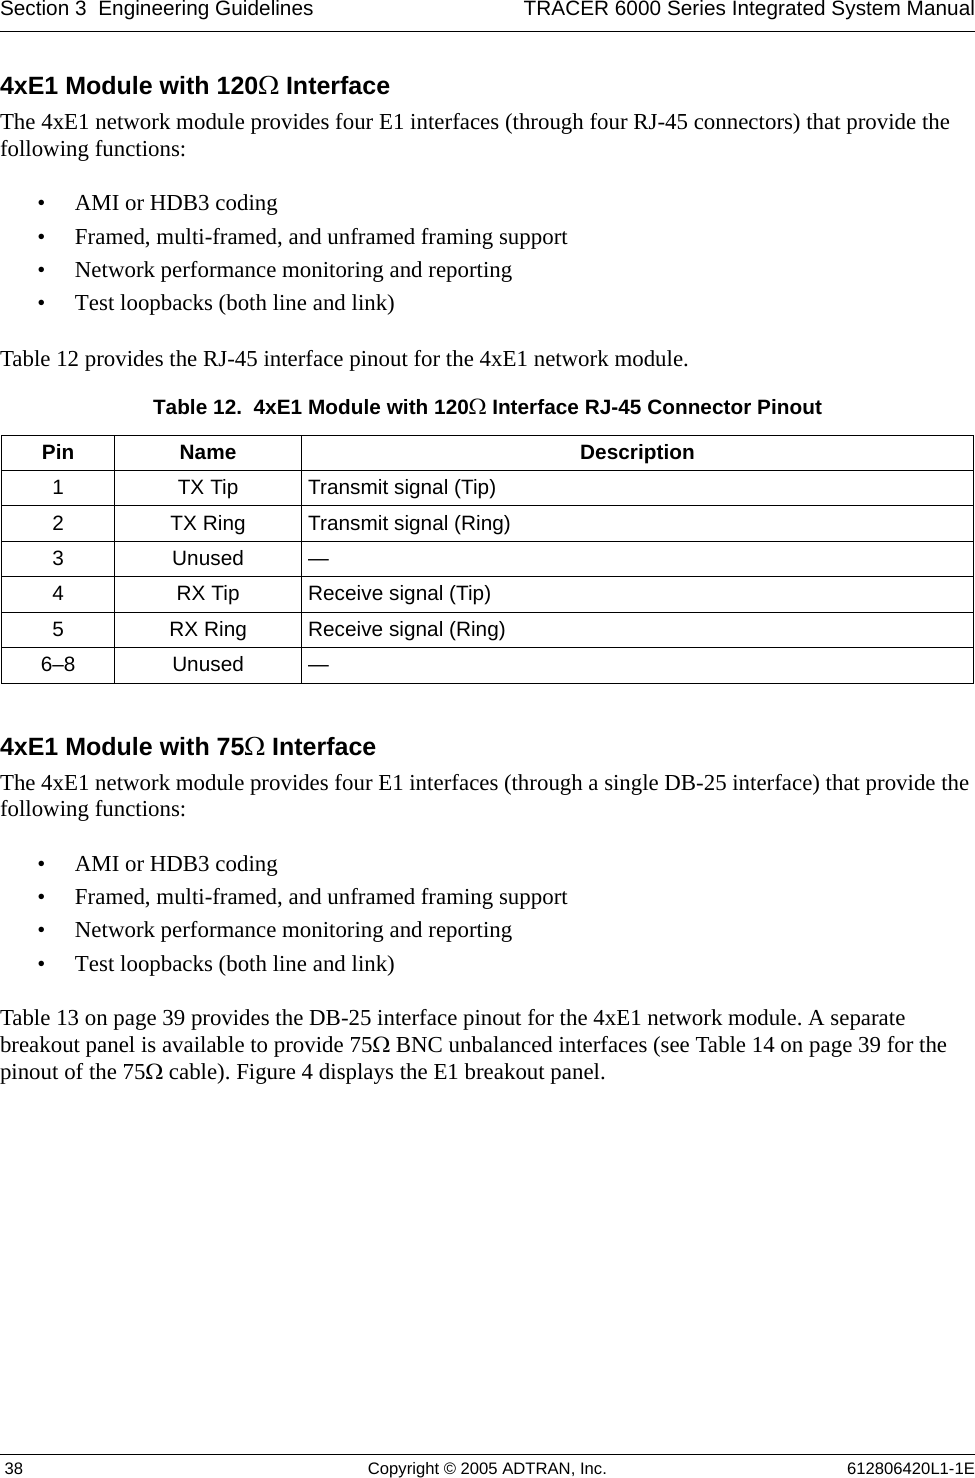 Section 3  Engineering Guidelines TRACER 6000 Series Integrated System Manual 38 Copyright © 2005 ADTRAN, Inc. 612806420L1-1E4xE1 Module with 120Ω InterfaceThe 4xE1 network module provides four E1 interfaces (through four RJ-45 connectors) that provide the following functions:• AMI or HDB3 coding• Framed, multi-framed, and unframed framing support• Network performance monitoring and reporting• Test loopbacks (both line and link)Table 12 provides the RJ-45 interface pinout for the 4xE1 network module. 4xE1 Module with 75Ω InterfaceThe 4xE1 network module provides four E1 interfaces (through a single DB-25 interface) that provide the following functions:• AMI or HDB3 coding• Framed, multi-framed, and unframed framing support• Network performance monitoring and reporting• Test loopbacks (both line and link)Table 13 on page 39 provides the DB-25 interface pinout for the 4xE1 network module. A separate breakout panel is available to provide 75Ω BNC unbalanced interfaces (see Table 14 on page 39 for the pinout of the 75Ω cable). Figure 4 displays the E1 breakout panel.Table 12.  4xE1 Module with 120Ω Interface RJ-45 Connector Pinout Pin Name Description1 TX Tip Transmit signal (Tip)2 TX Ring Transmit signal (Ring)3Unused—4 RX Tip Receive signal (Tip)5 RX Ring Receive signal (Ring)6–8 Unused —